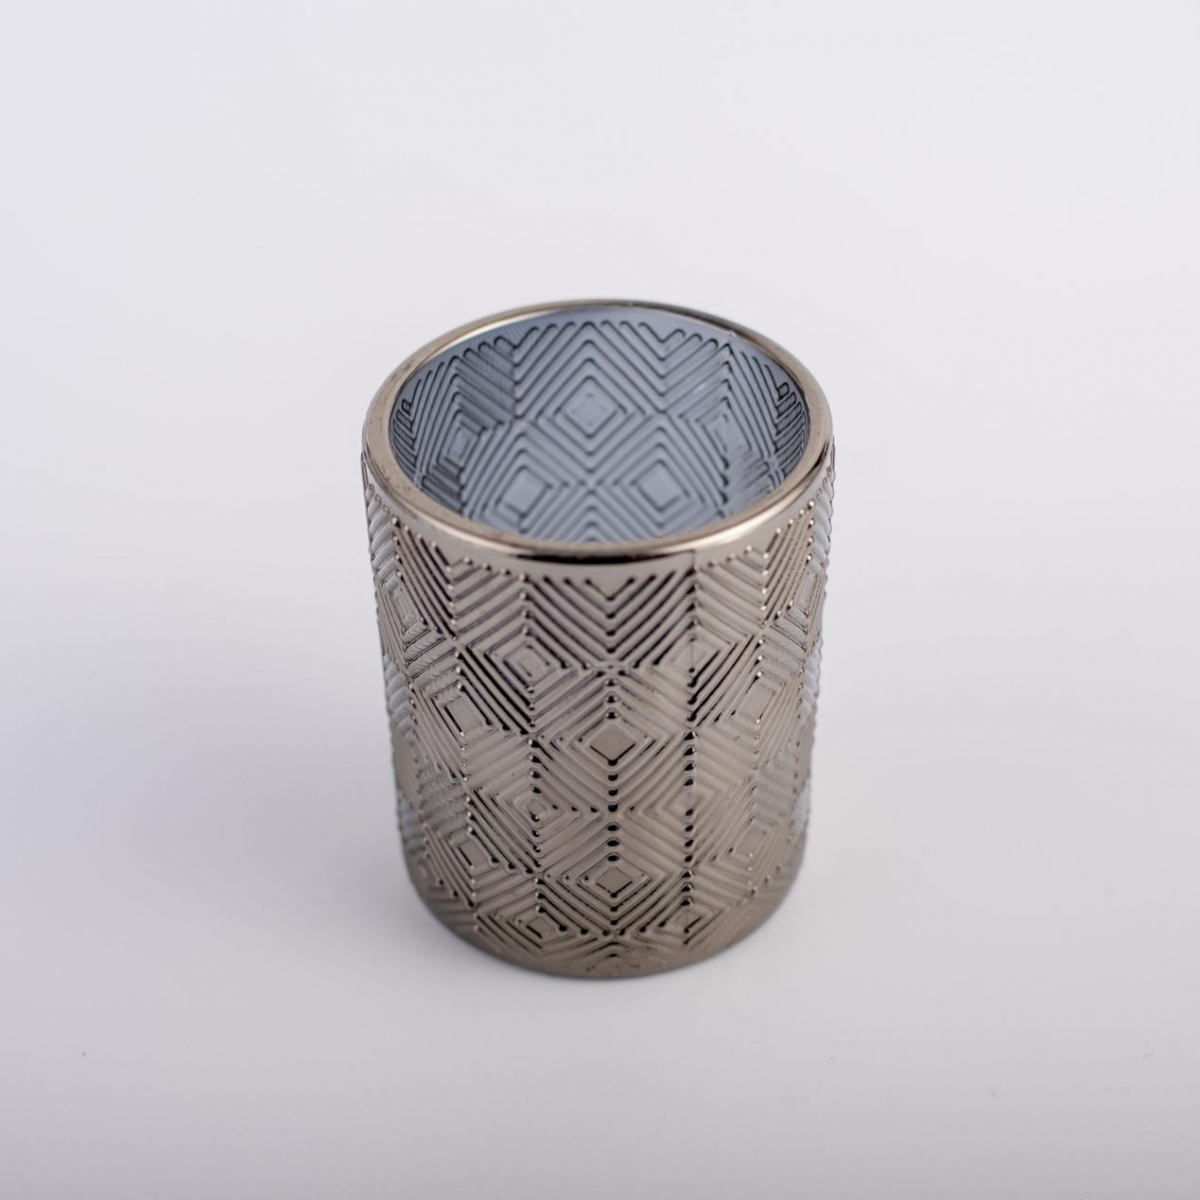 Candle Holder ：Smoke Gray Color , HERMES Square , Embossing Candle Jar , China Factory ,Cheap Price-HOWCANDLE-Candles,Scented Candles,Aromatherapy Candles,Soy Candles,Vegan Candles,Jar Candles,Pillar Candles,Candle Gift Sets,Essential Oils,Reed Diffuser,Candle Holder,